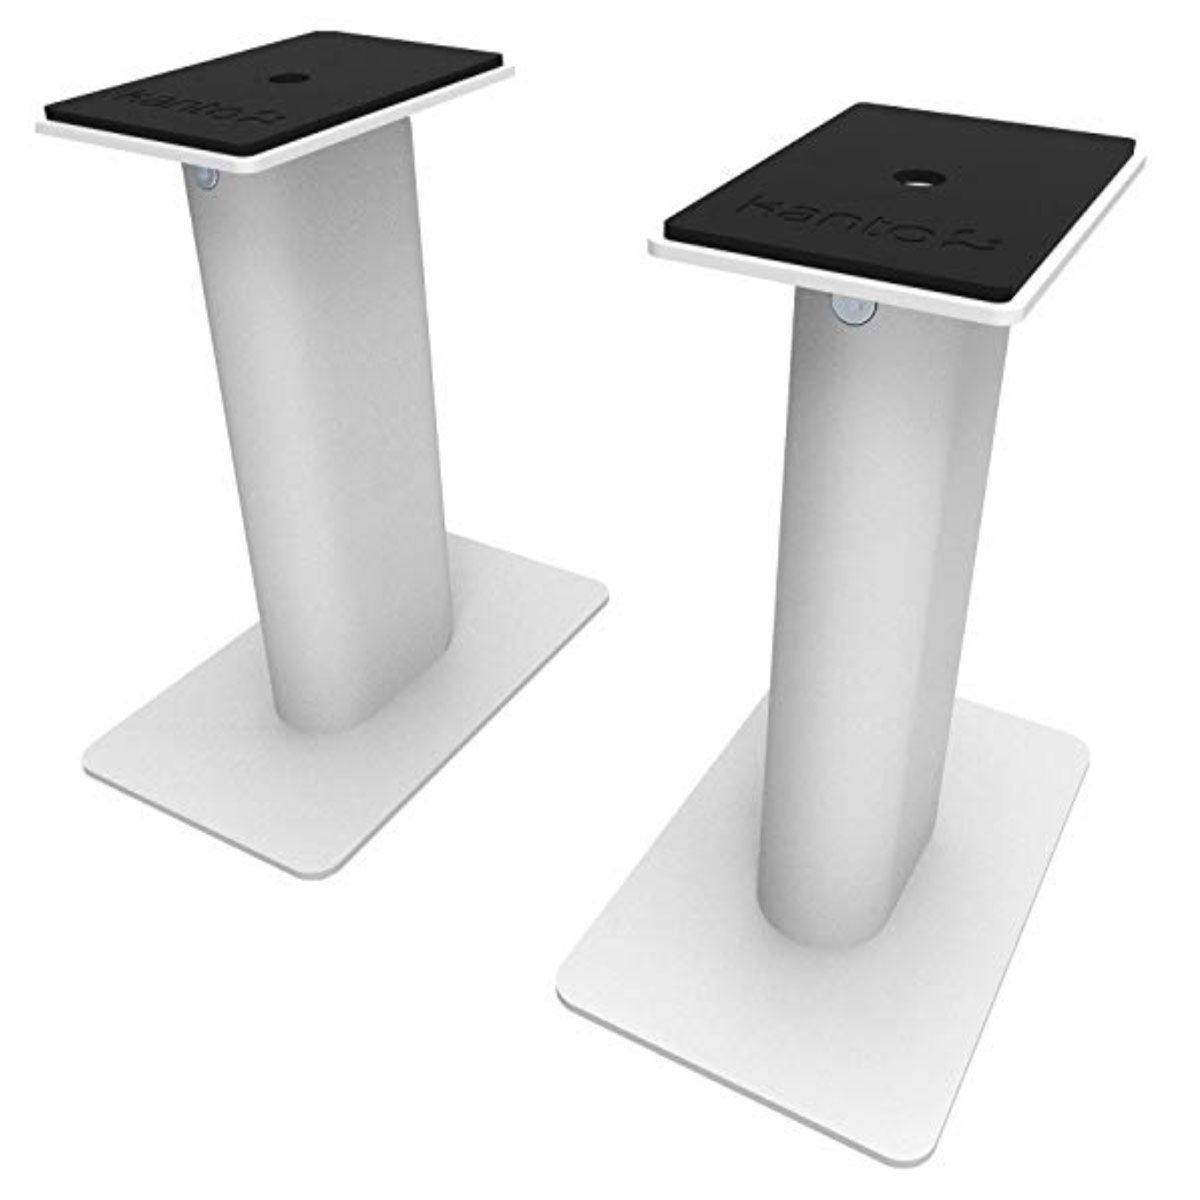 Kanto SP9 9 Inch Universal Desktop Speaker Stand - White - Front Angled View